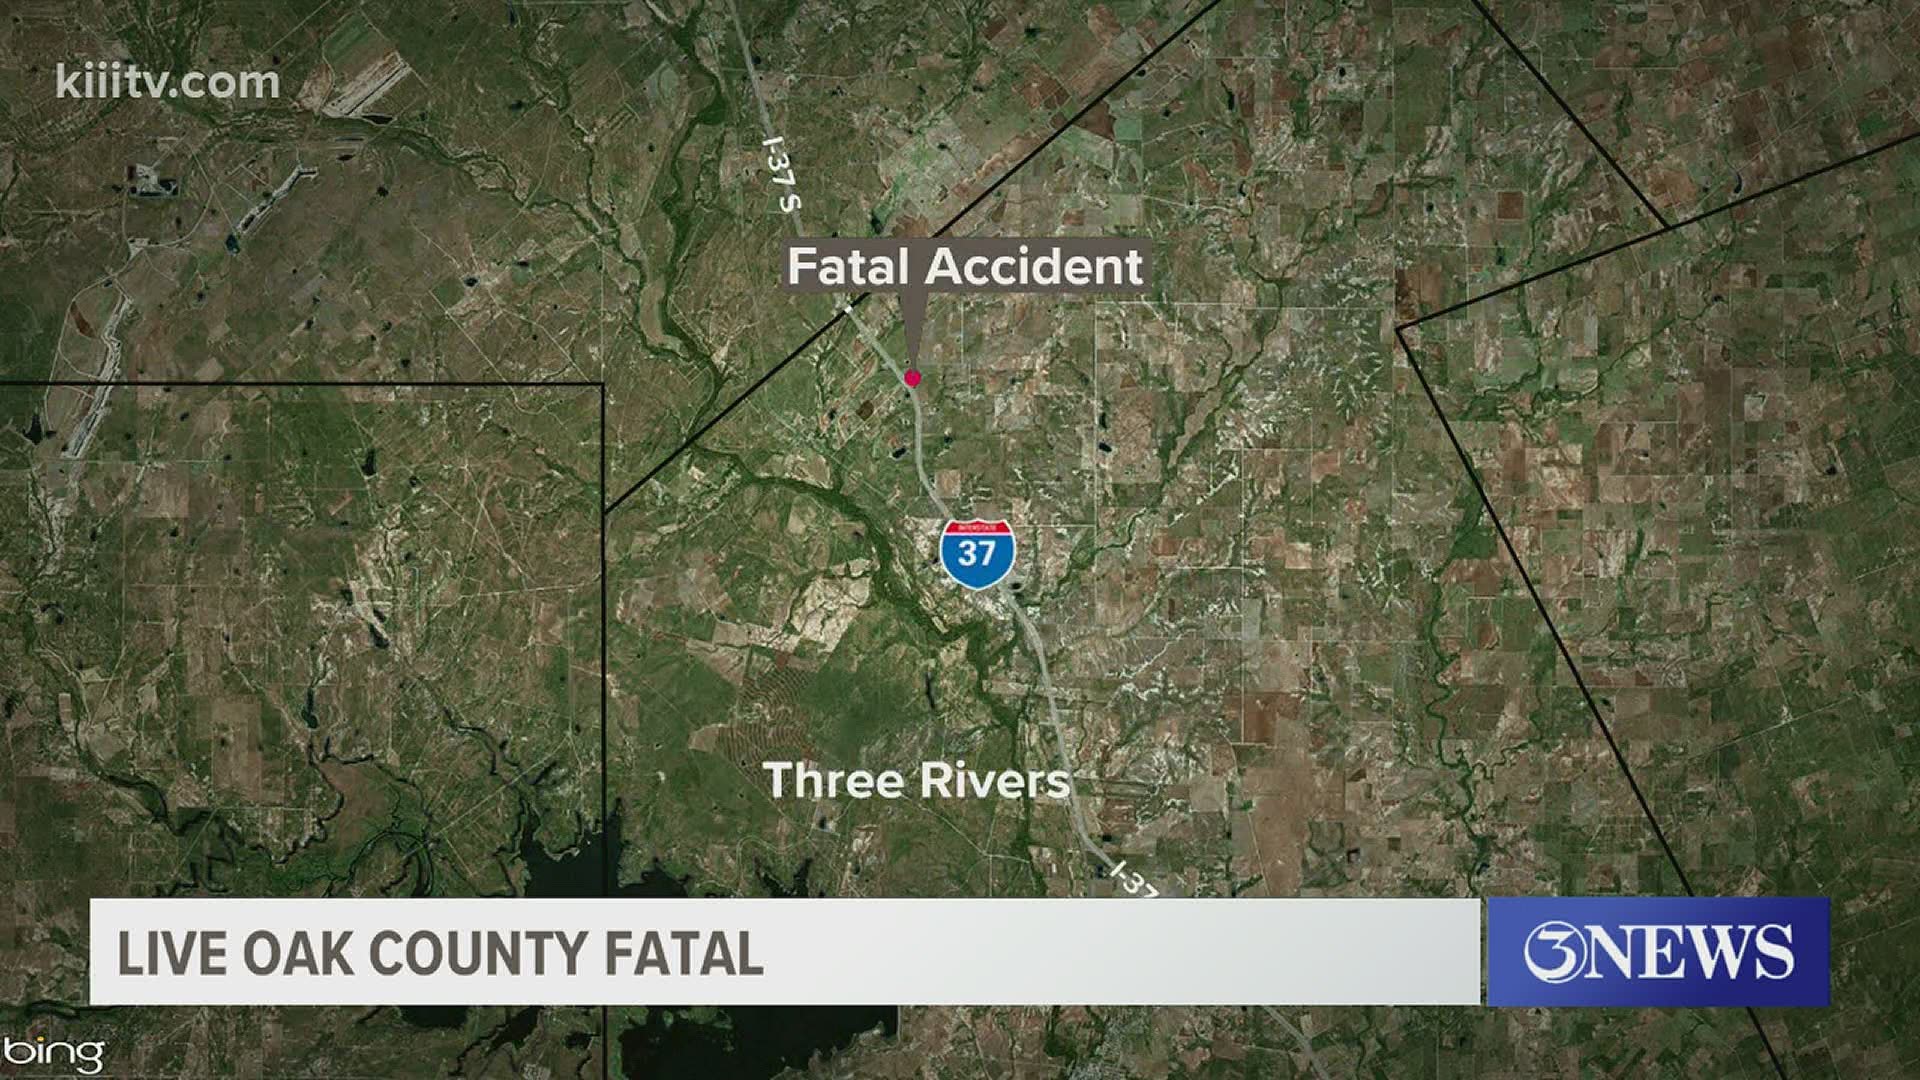 According to DPS, the crash took place at 2:47 a.m. eleven miles north of Three Rivers.